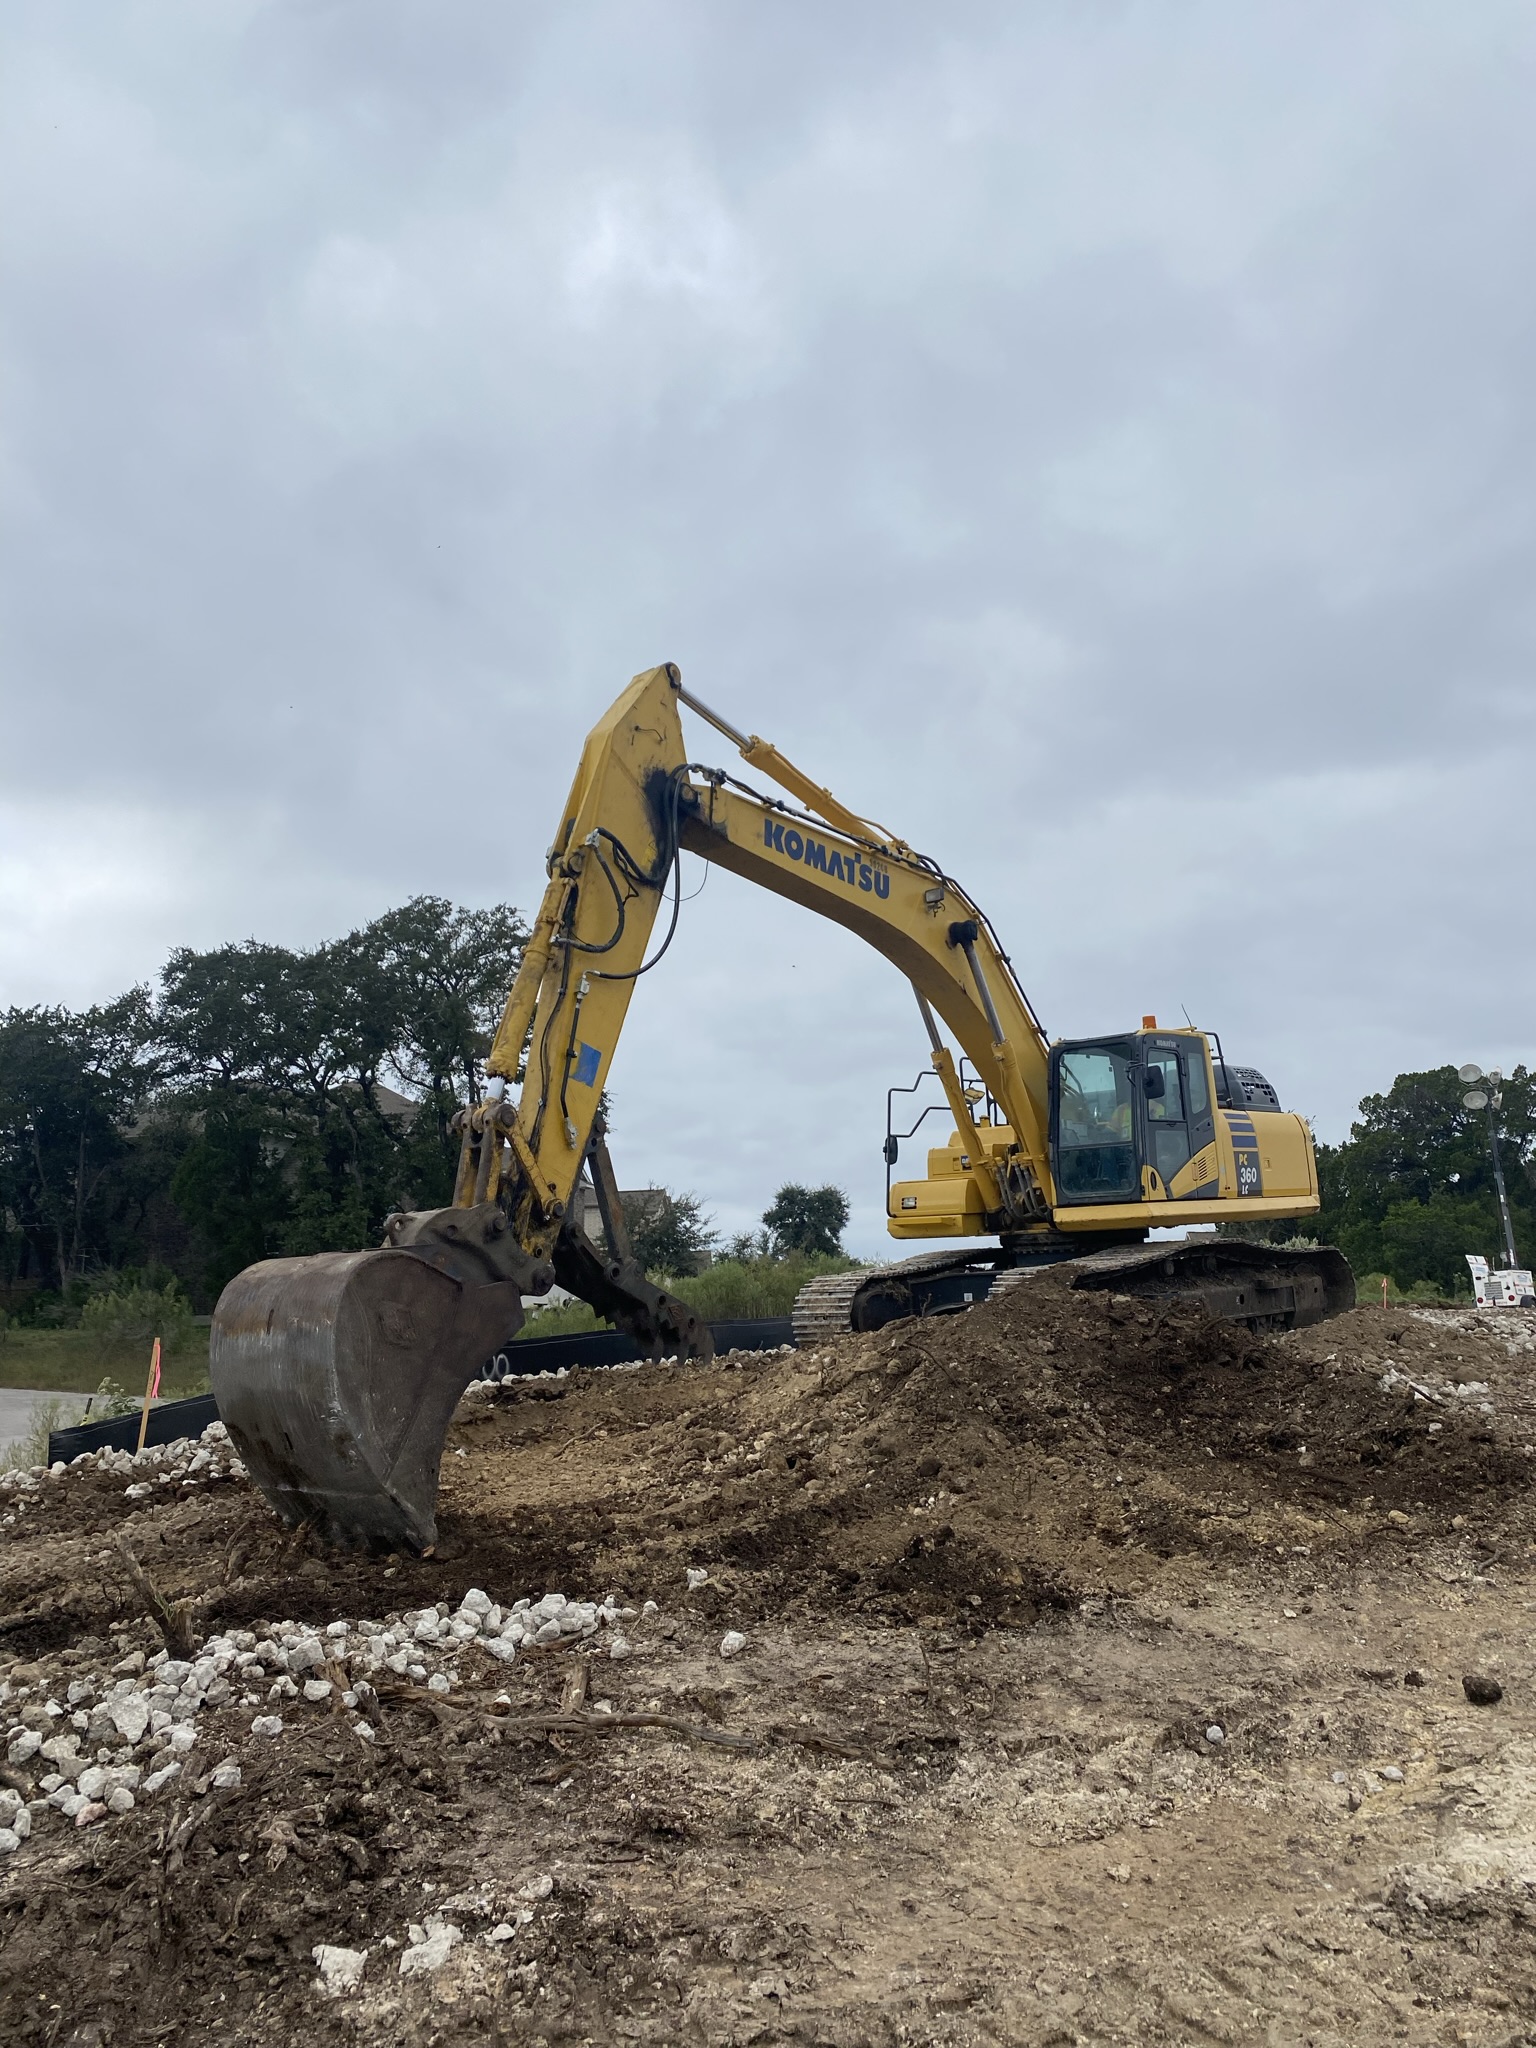 The team uses excavators to remove large amounts of dirt before grading activities begin in the US 290 West Segment. October 2021